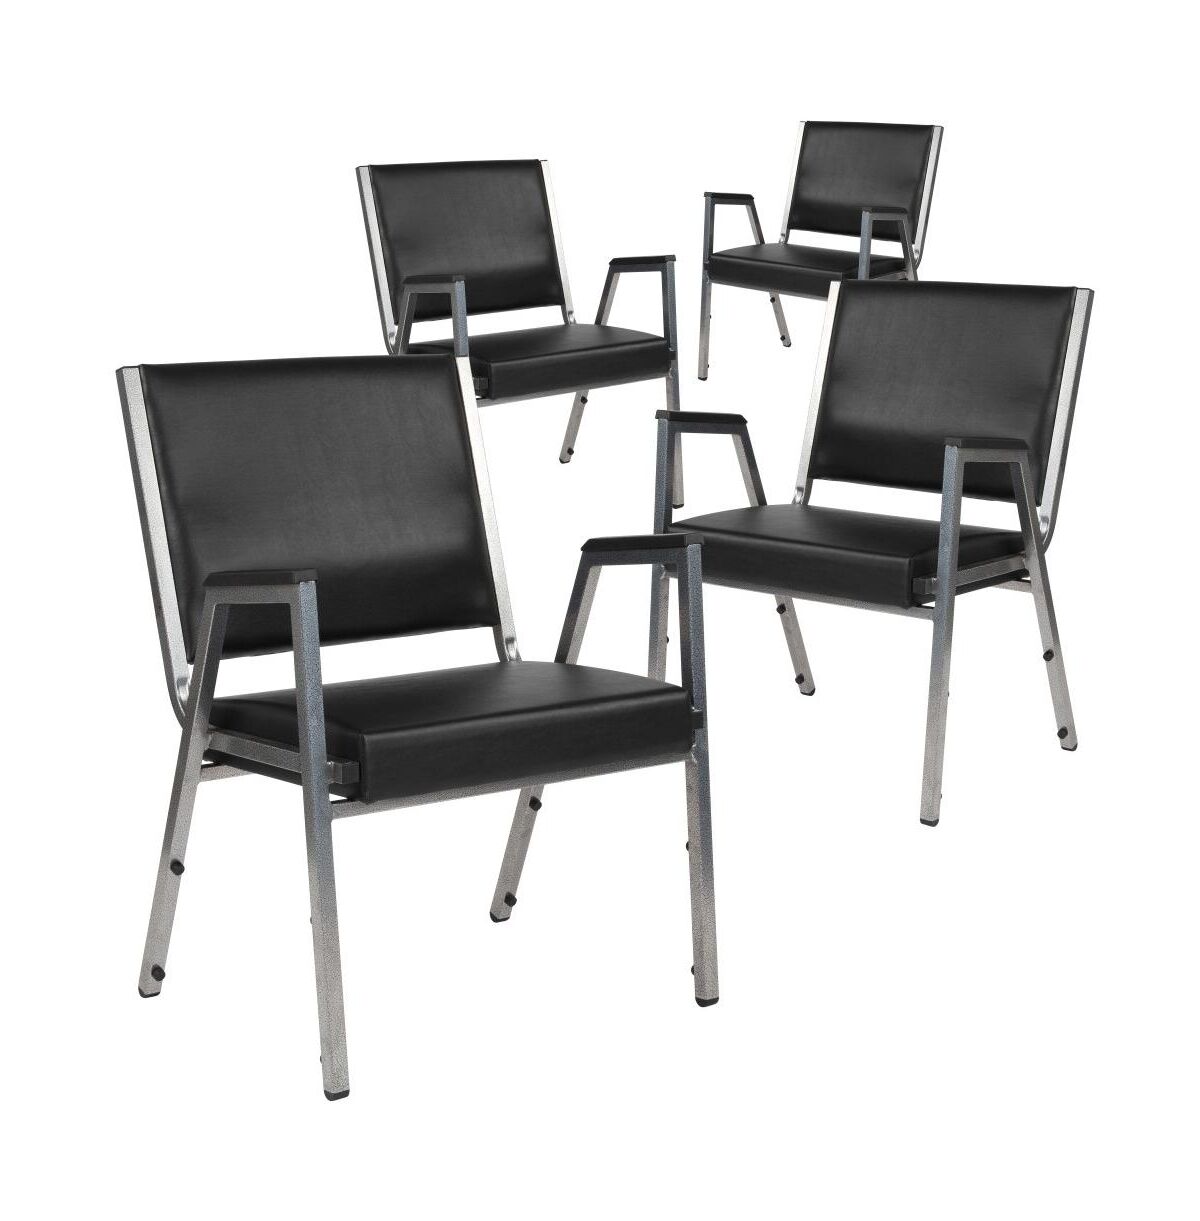 Emma+oliver 4 Pack 1000 Lb. Rated Antimicrobial Bariatric Medical Reception Arm Chair - Black vinyl